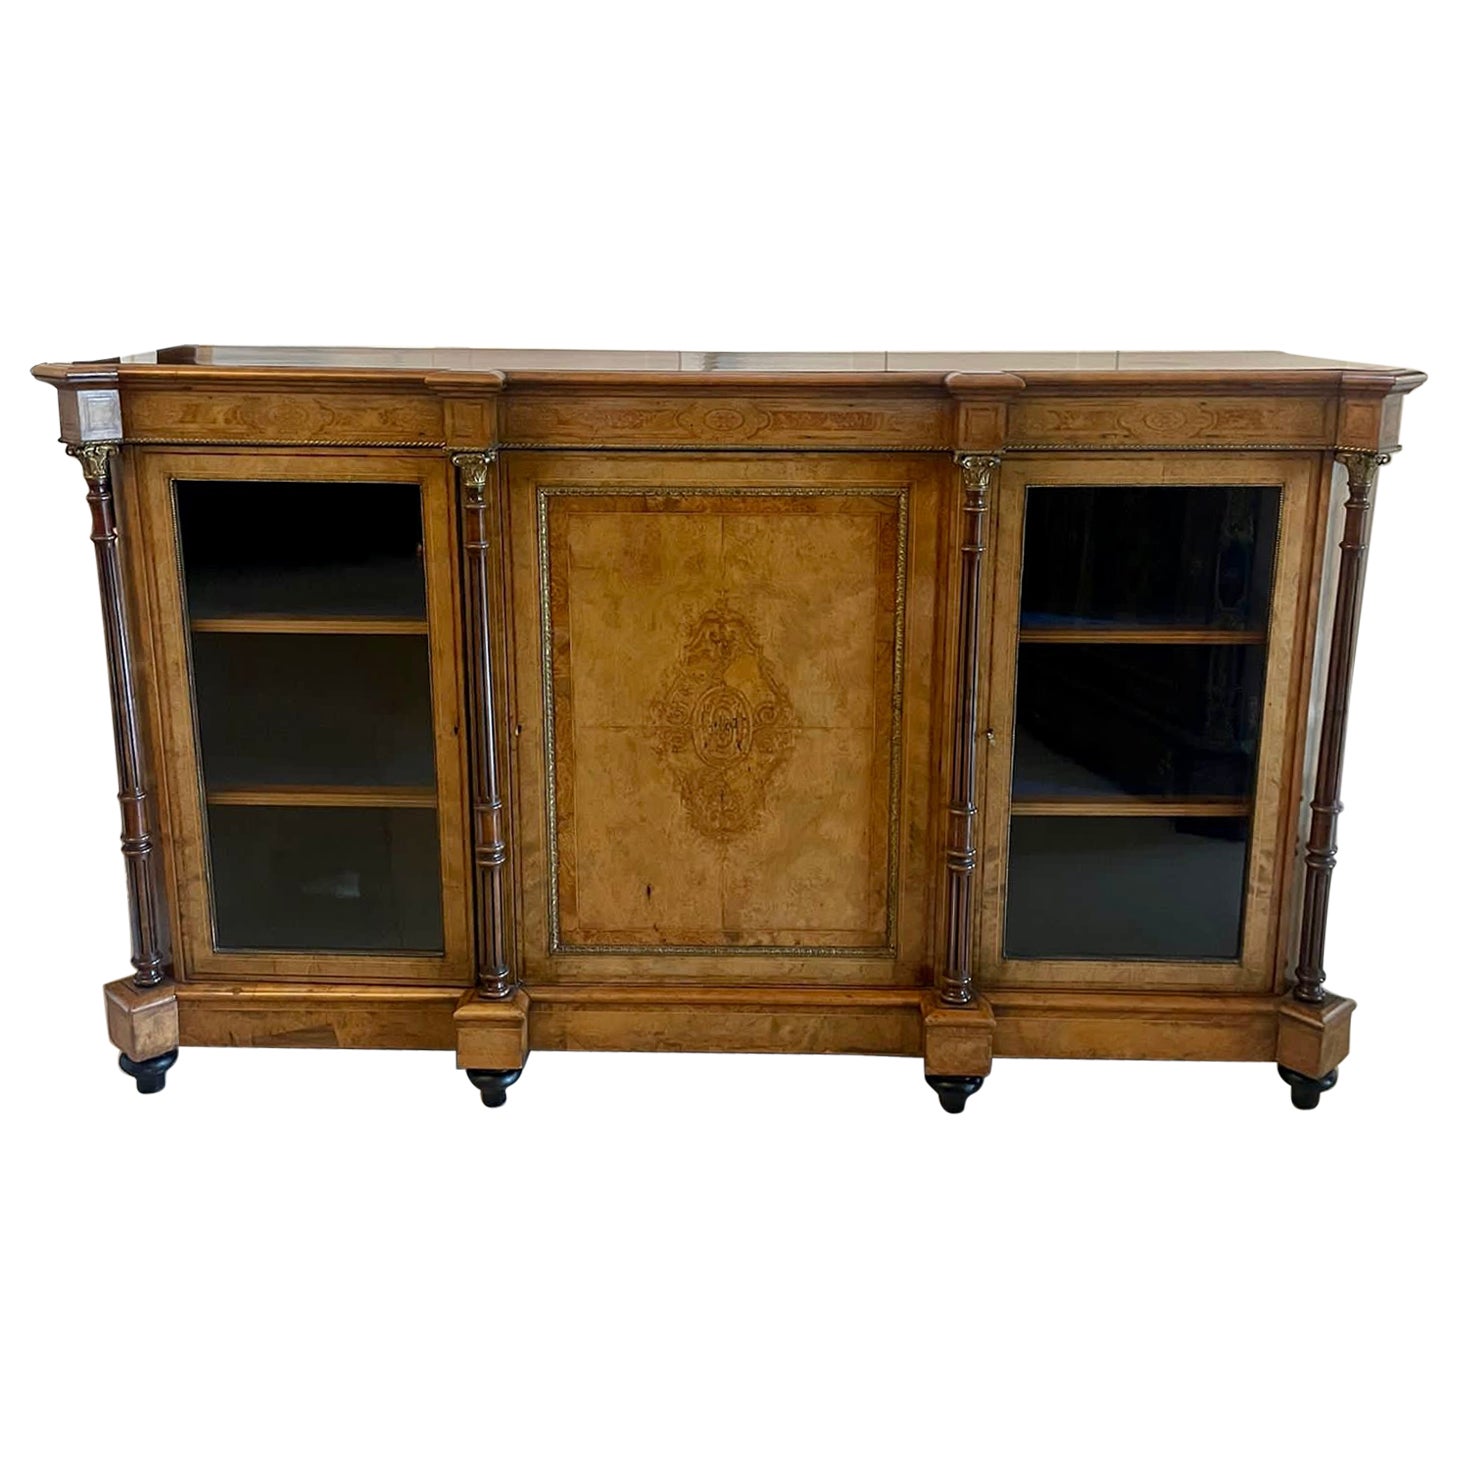 Outstanding Quality Antique Victorian Burr Walnut Inlaid Credenza/Sideboard